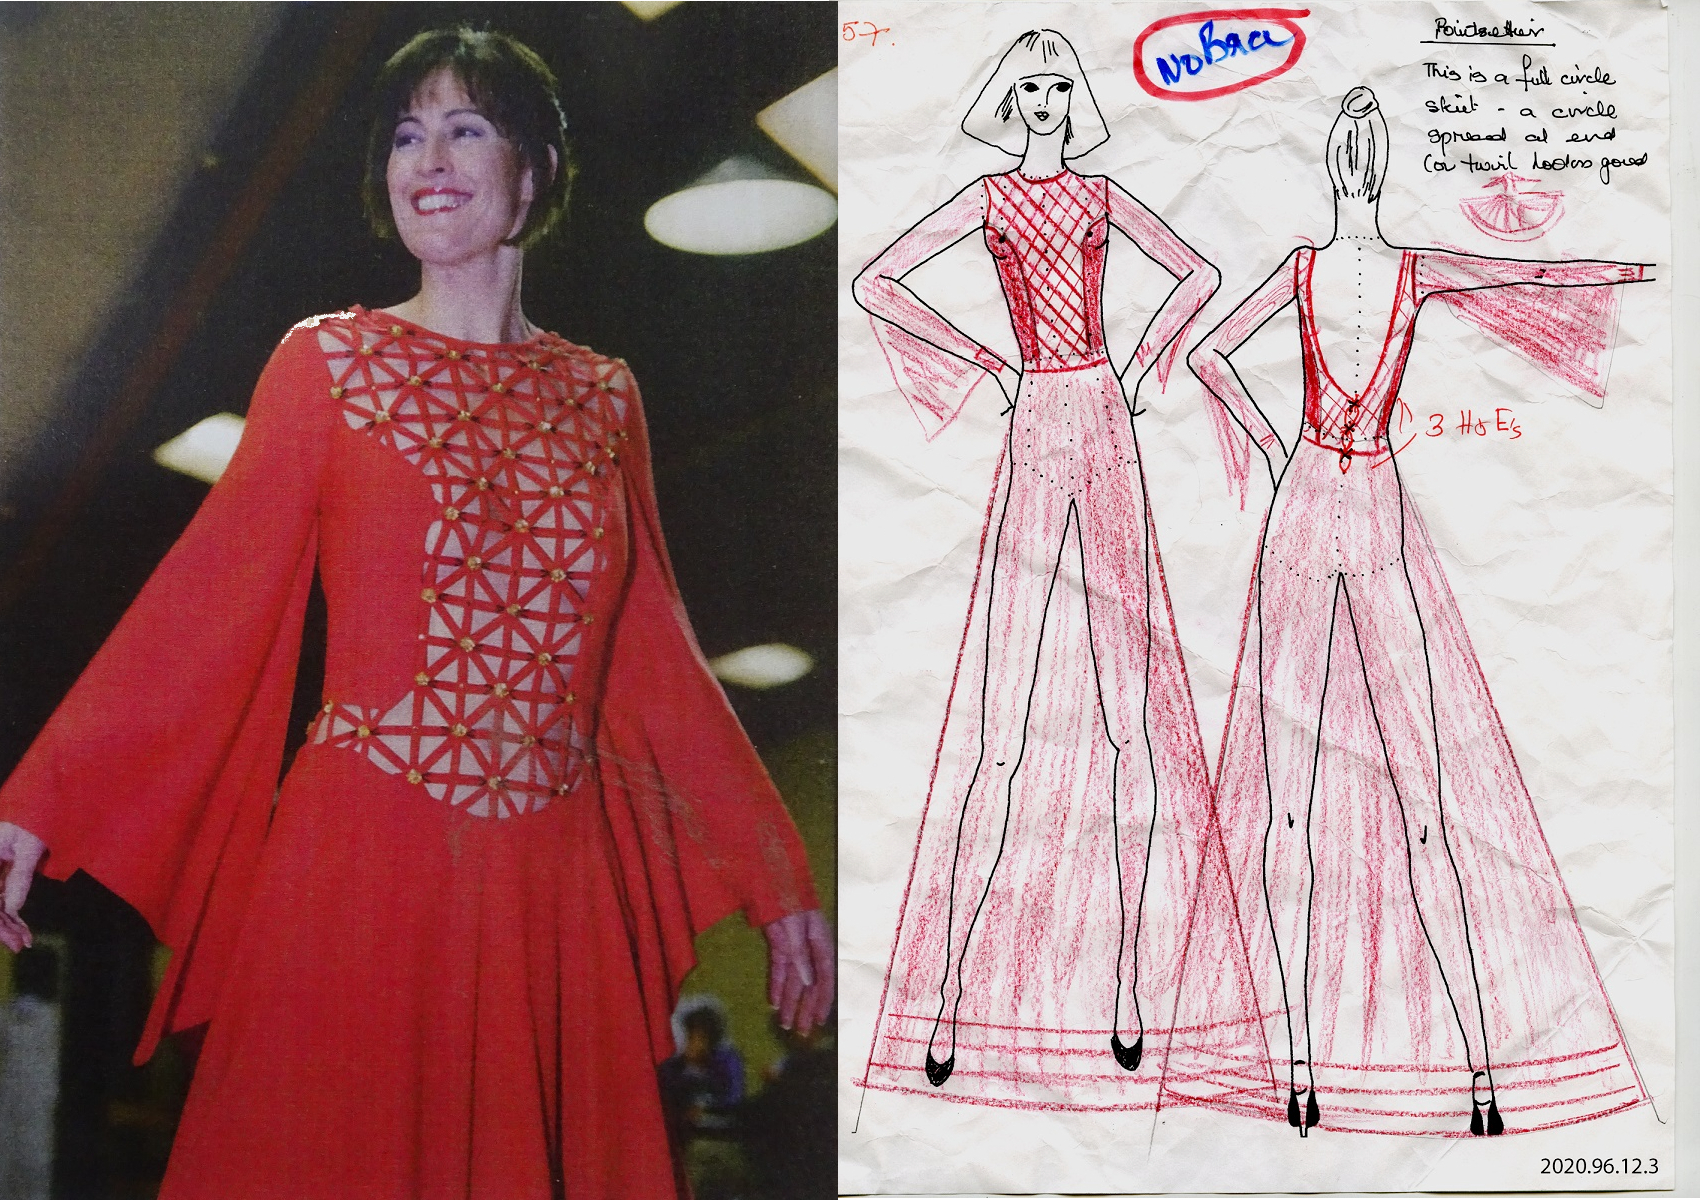 Fashion show guide sheet, Canterbury Museum 2020.96.12. Photo courtesy of Zora Price's daughters.